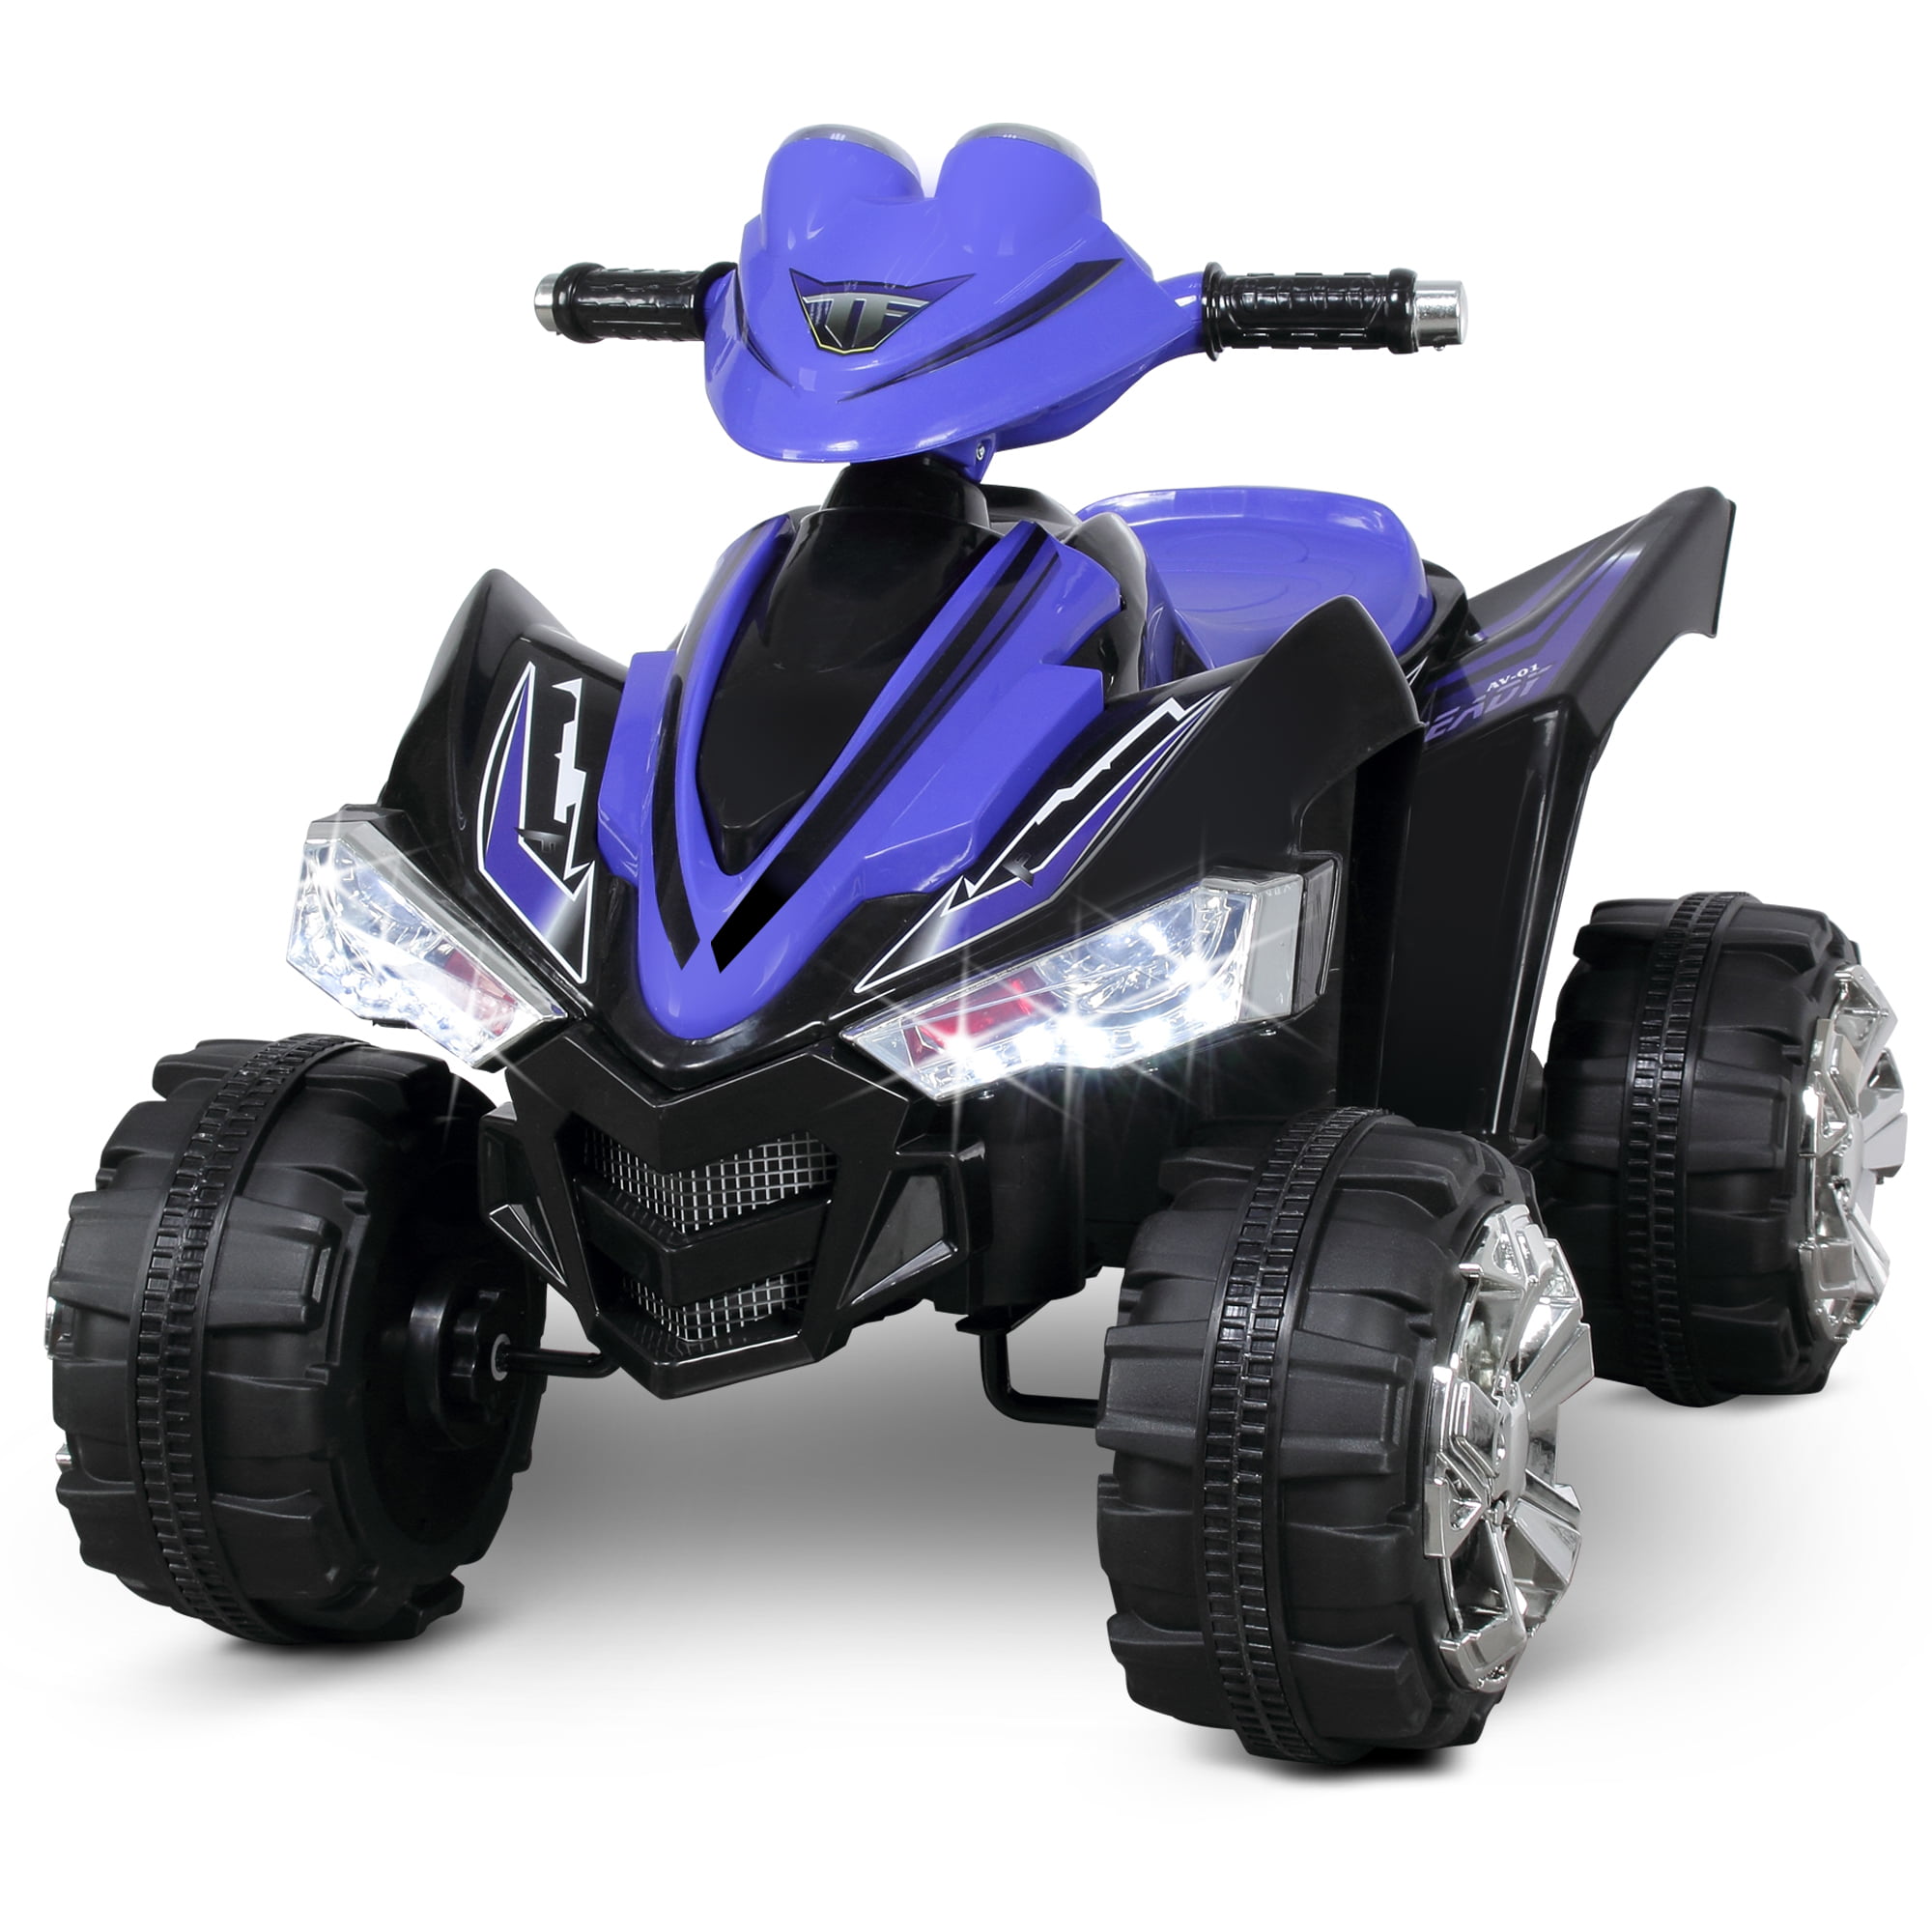 Horn Red Rear Wheel Motorized Ride on 4 Wheeler Quad Car for Kids Over 3 Years Old Costzon Ride on ATV LED Lights 2 Speeds 12V Battery Powered Electric Vehicle w/ Safety Belt USB/ MP3/TF 